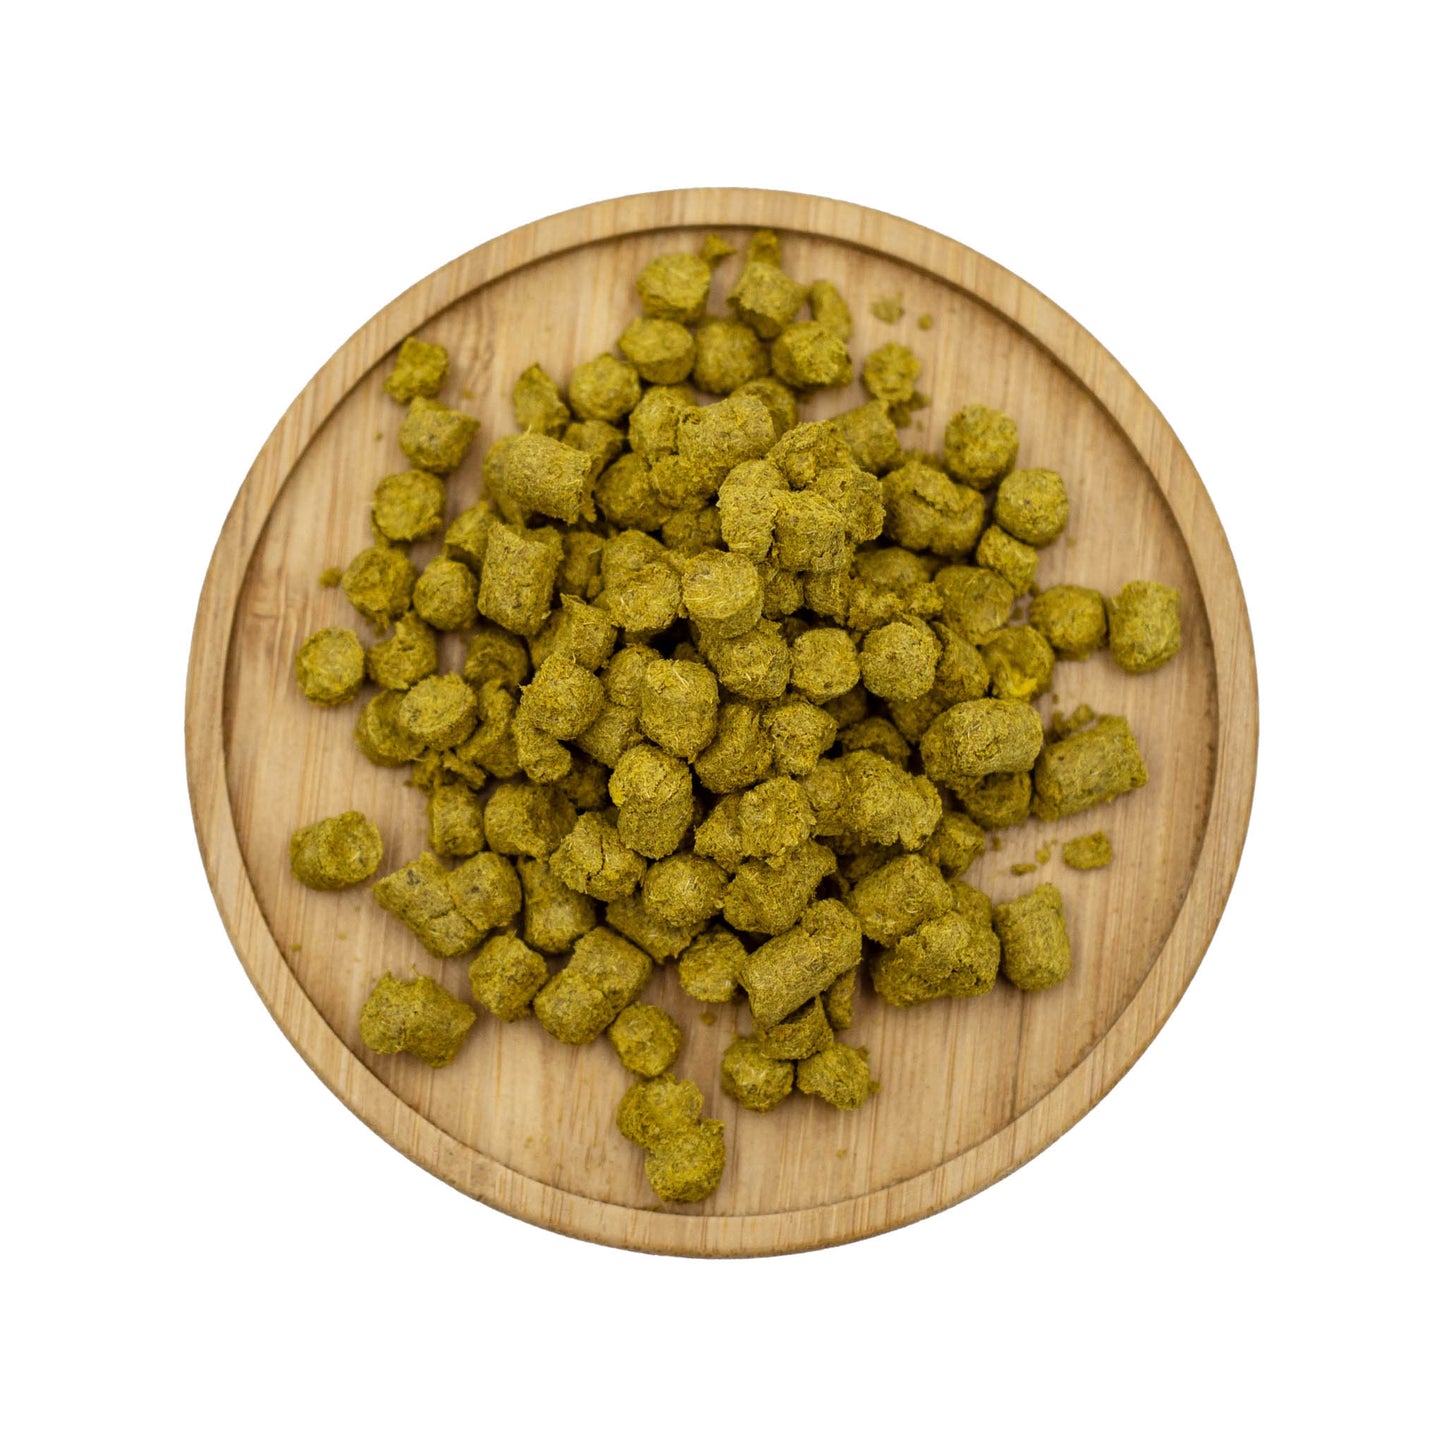 50g packet of Chinook hops for beer making